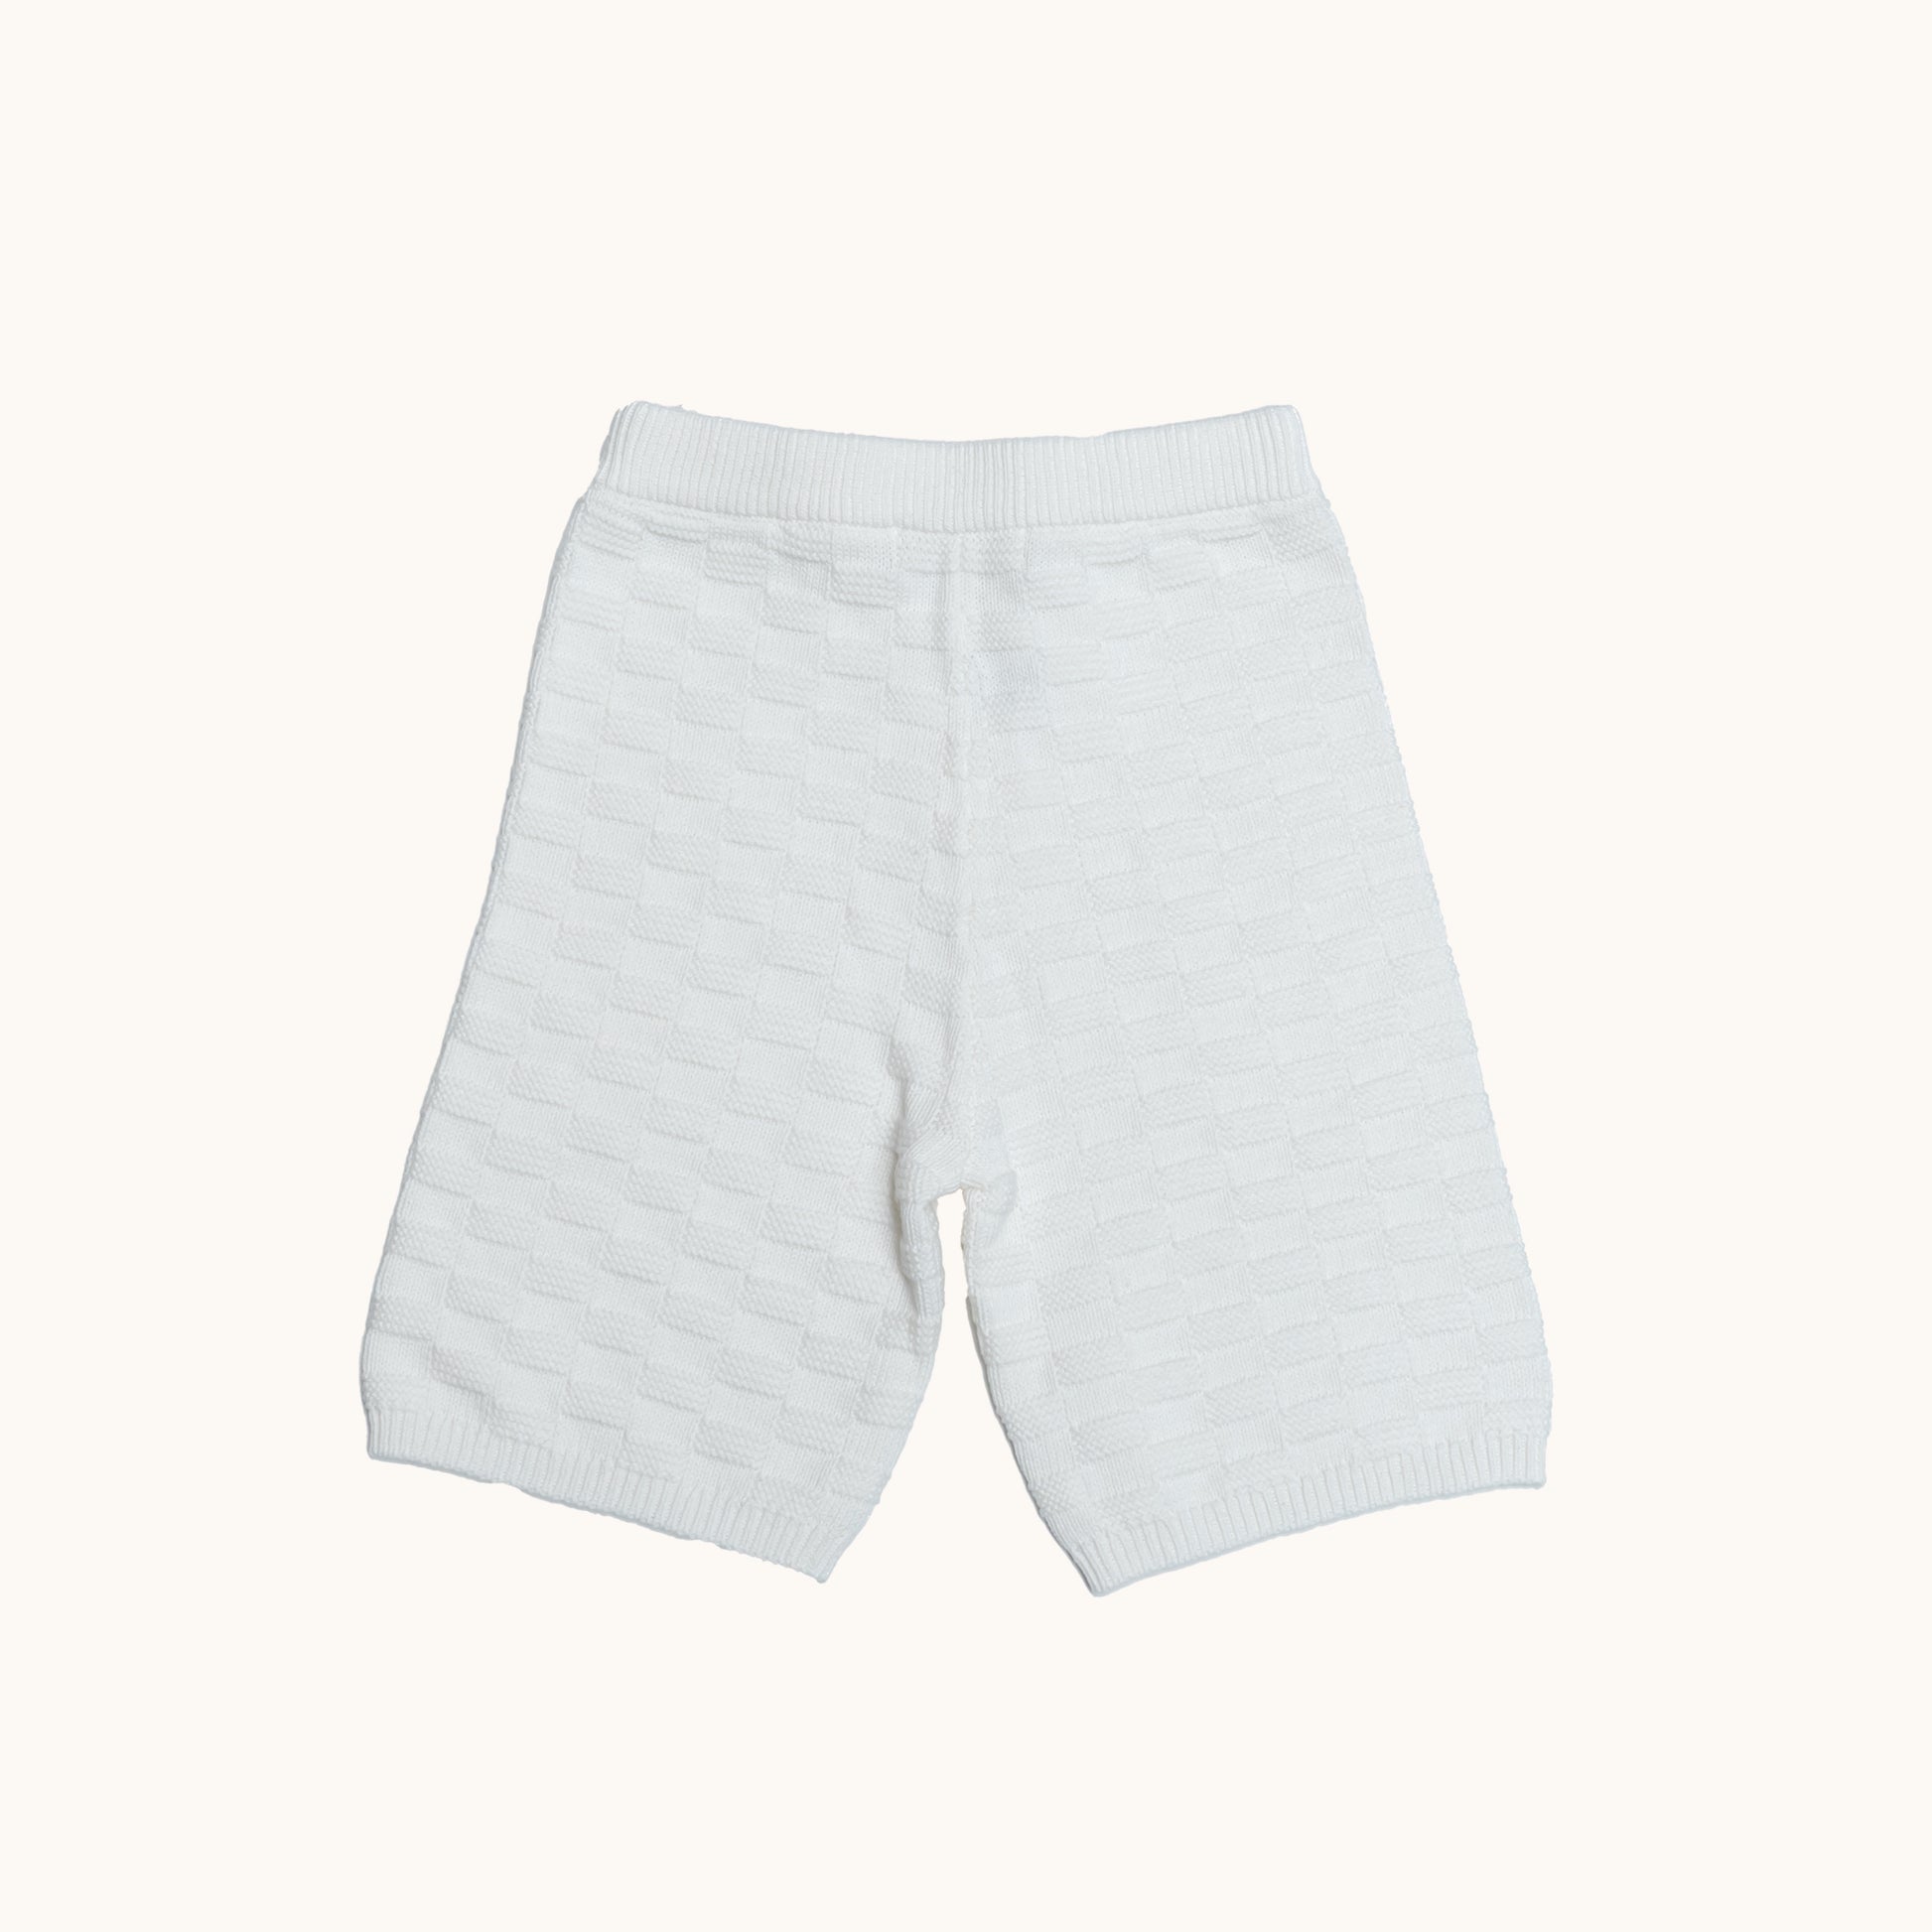 KNITTED BERMUDA SHORTS - CREAM; 100% Organic Cotton; Shorts made from GOTS-certified organic cotton; Elasticated waistband; Relaxed fit.